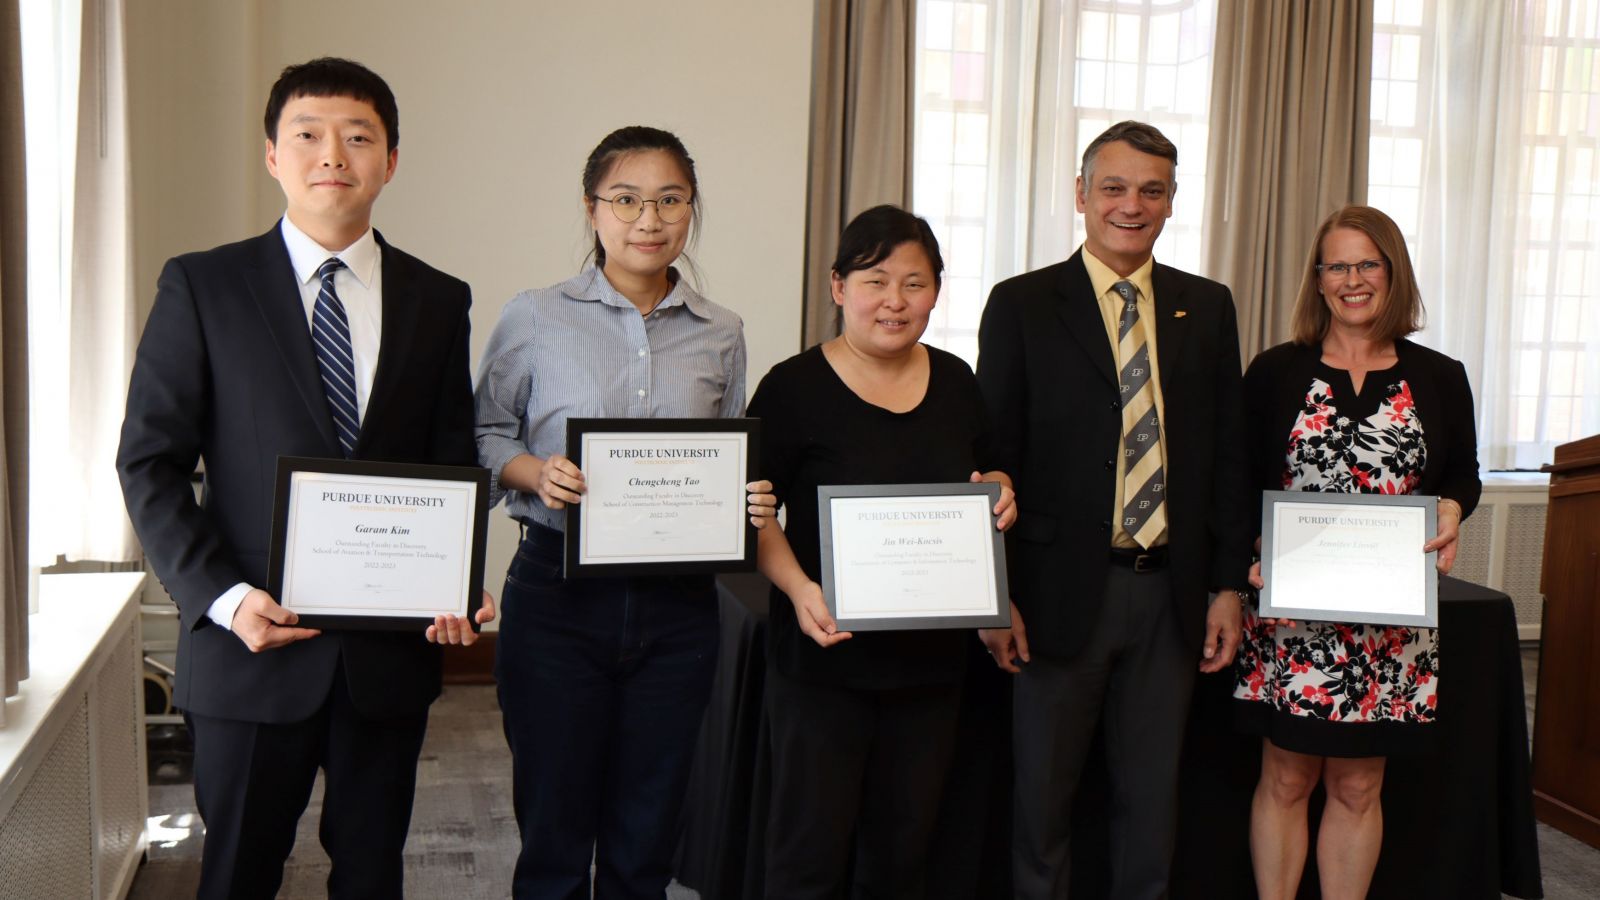 Outstanding Faculty in Discovery nominees (Garam Kim, Chengcheng Tao, Jin Wei-Kocsis and Jennifer Linvill) with Daniel Castro.  (Purdue University photo/John O'Malley)